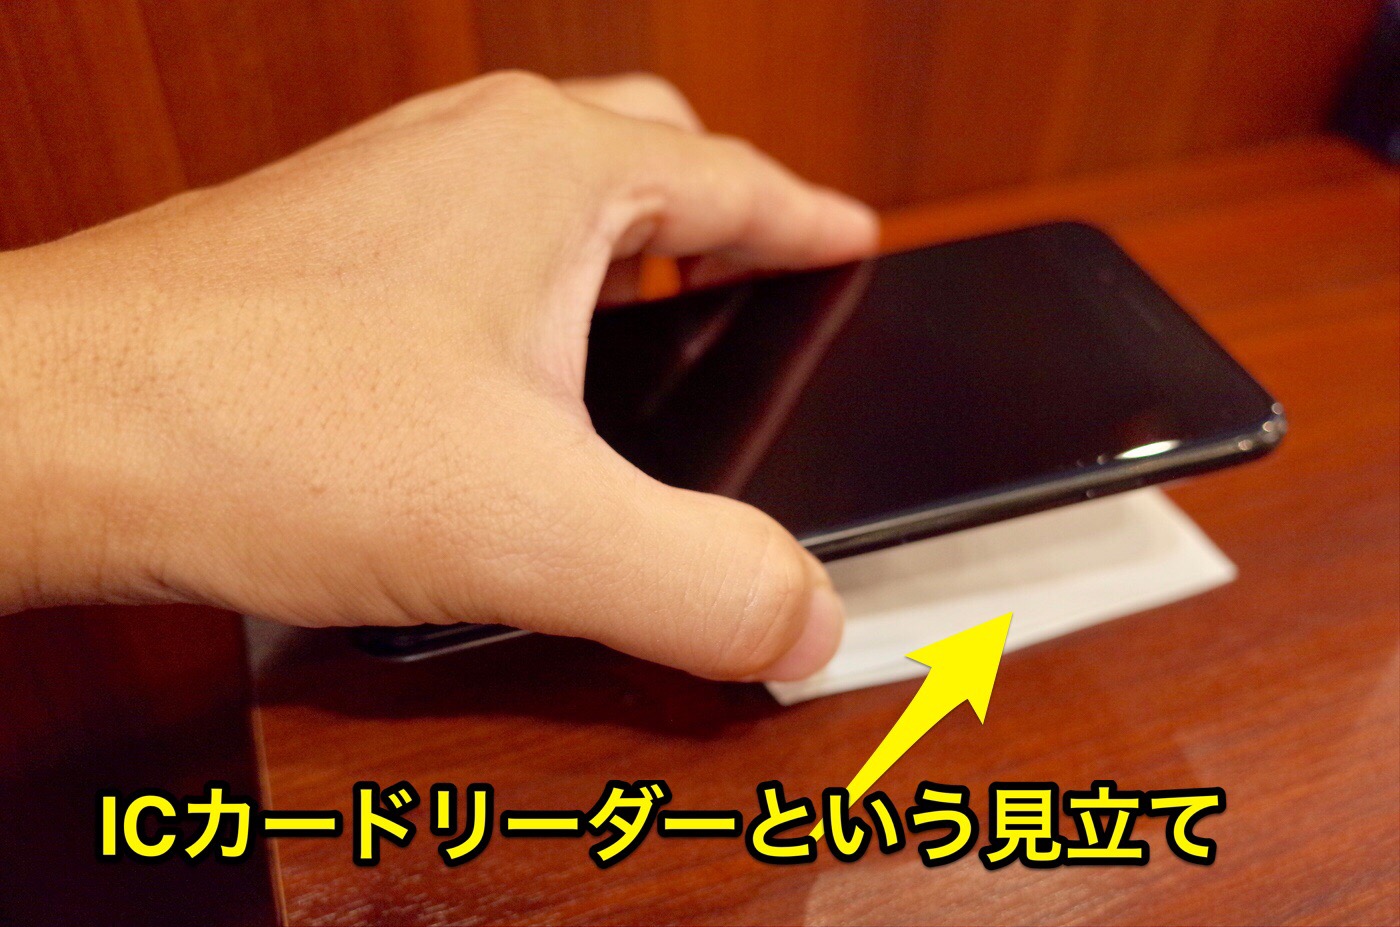 iphone-nfc-reader-tips002